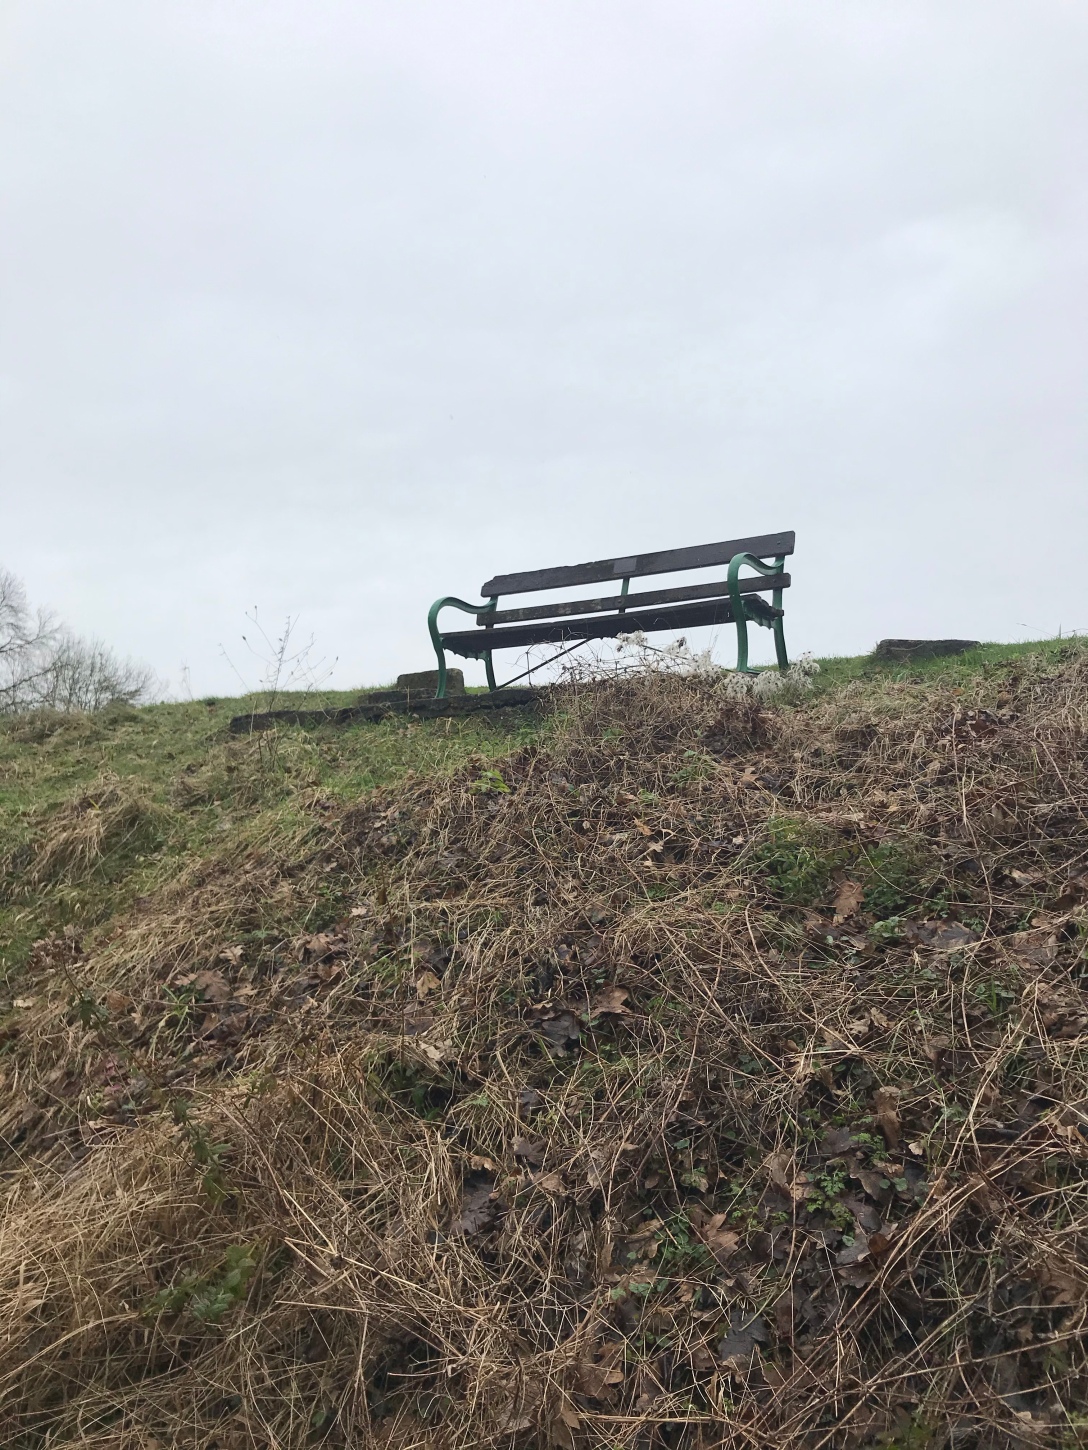 the image is of a bench on sparse land in the middle of winter